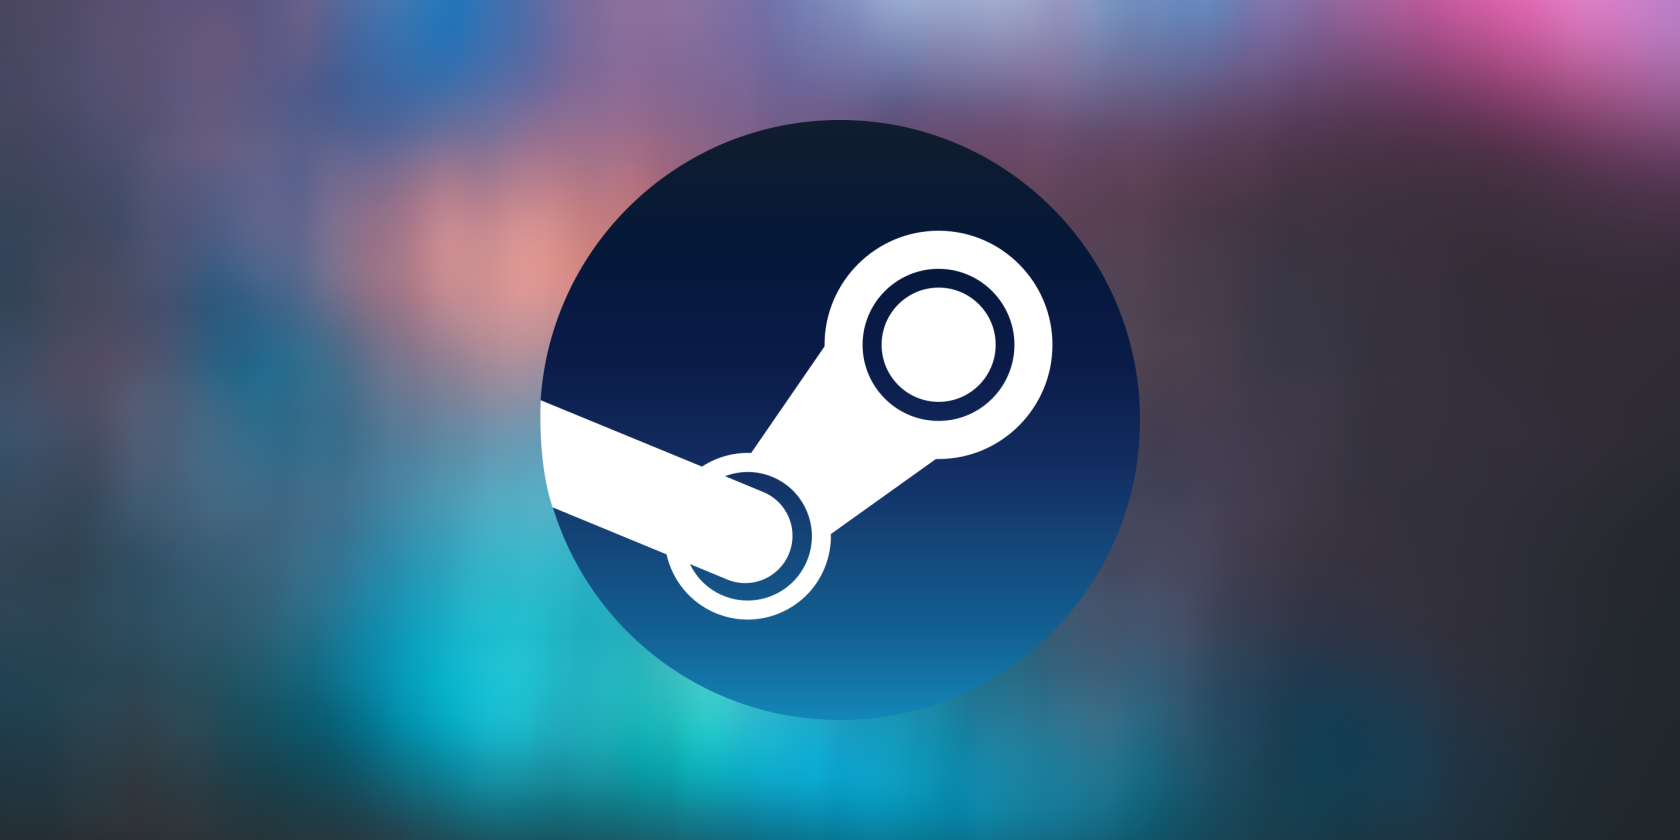 steam games for mac on sale